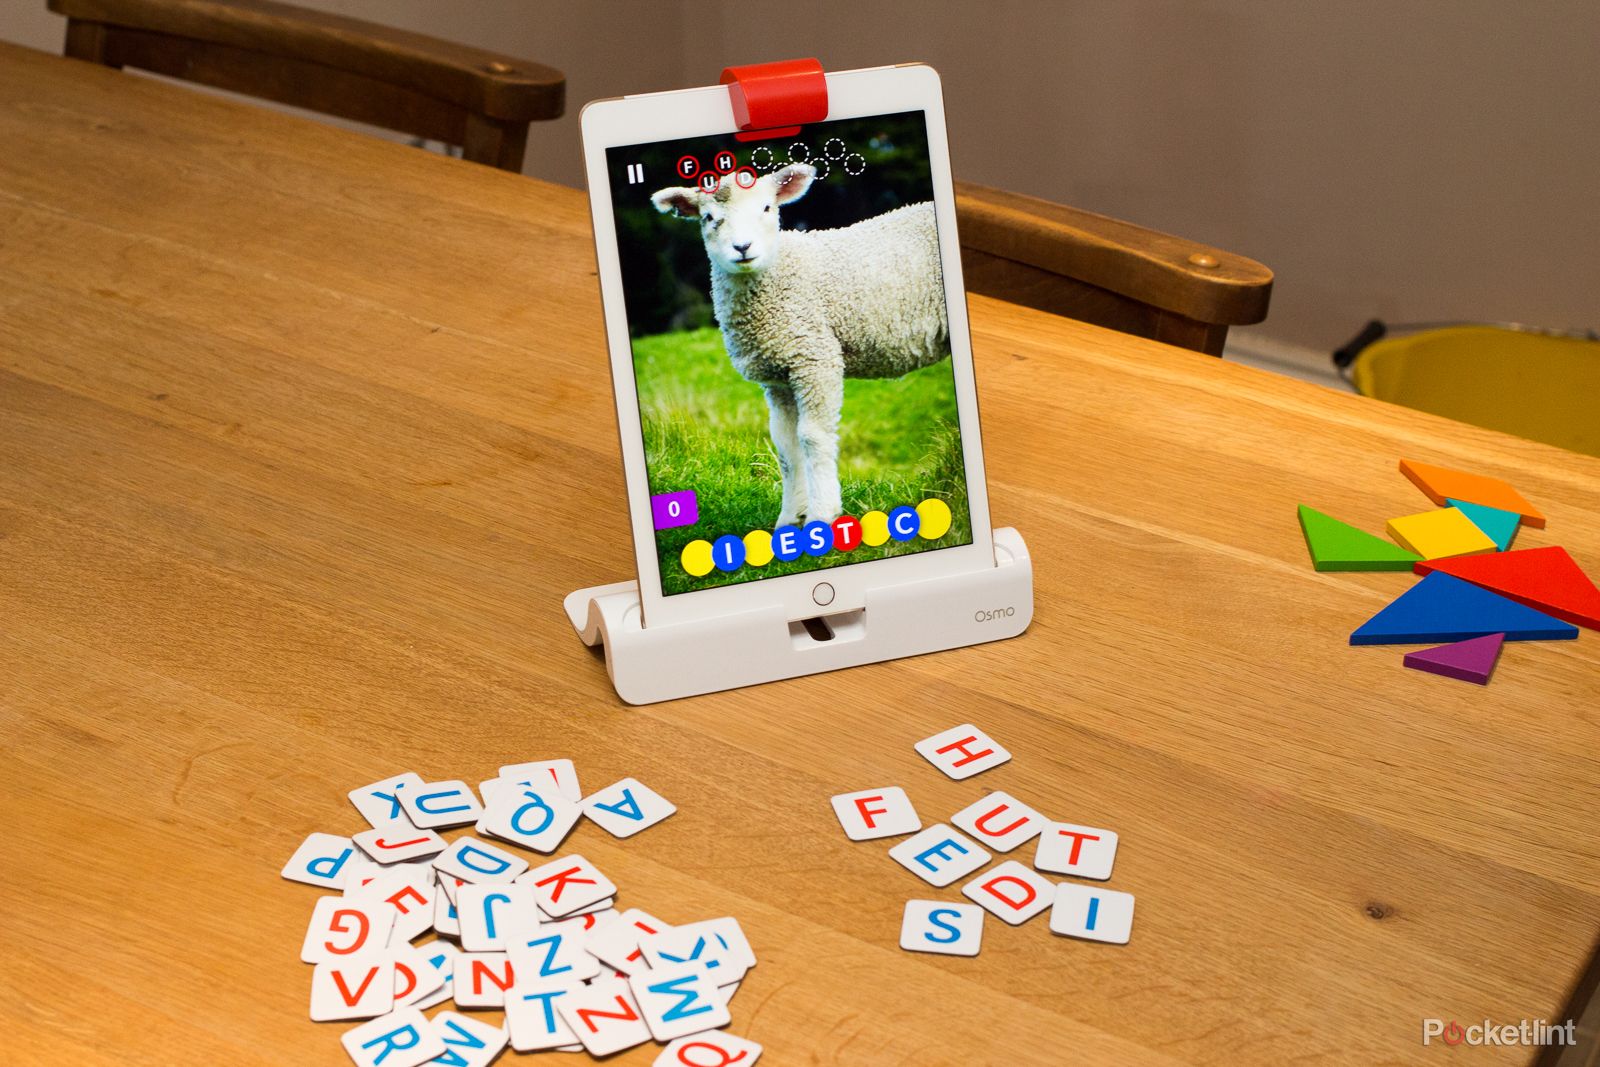 osmo review image 8